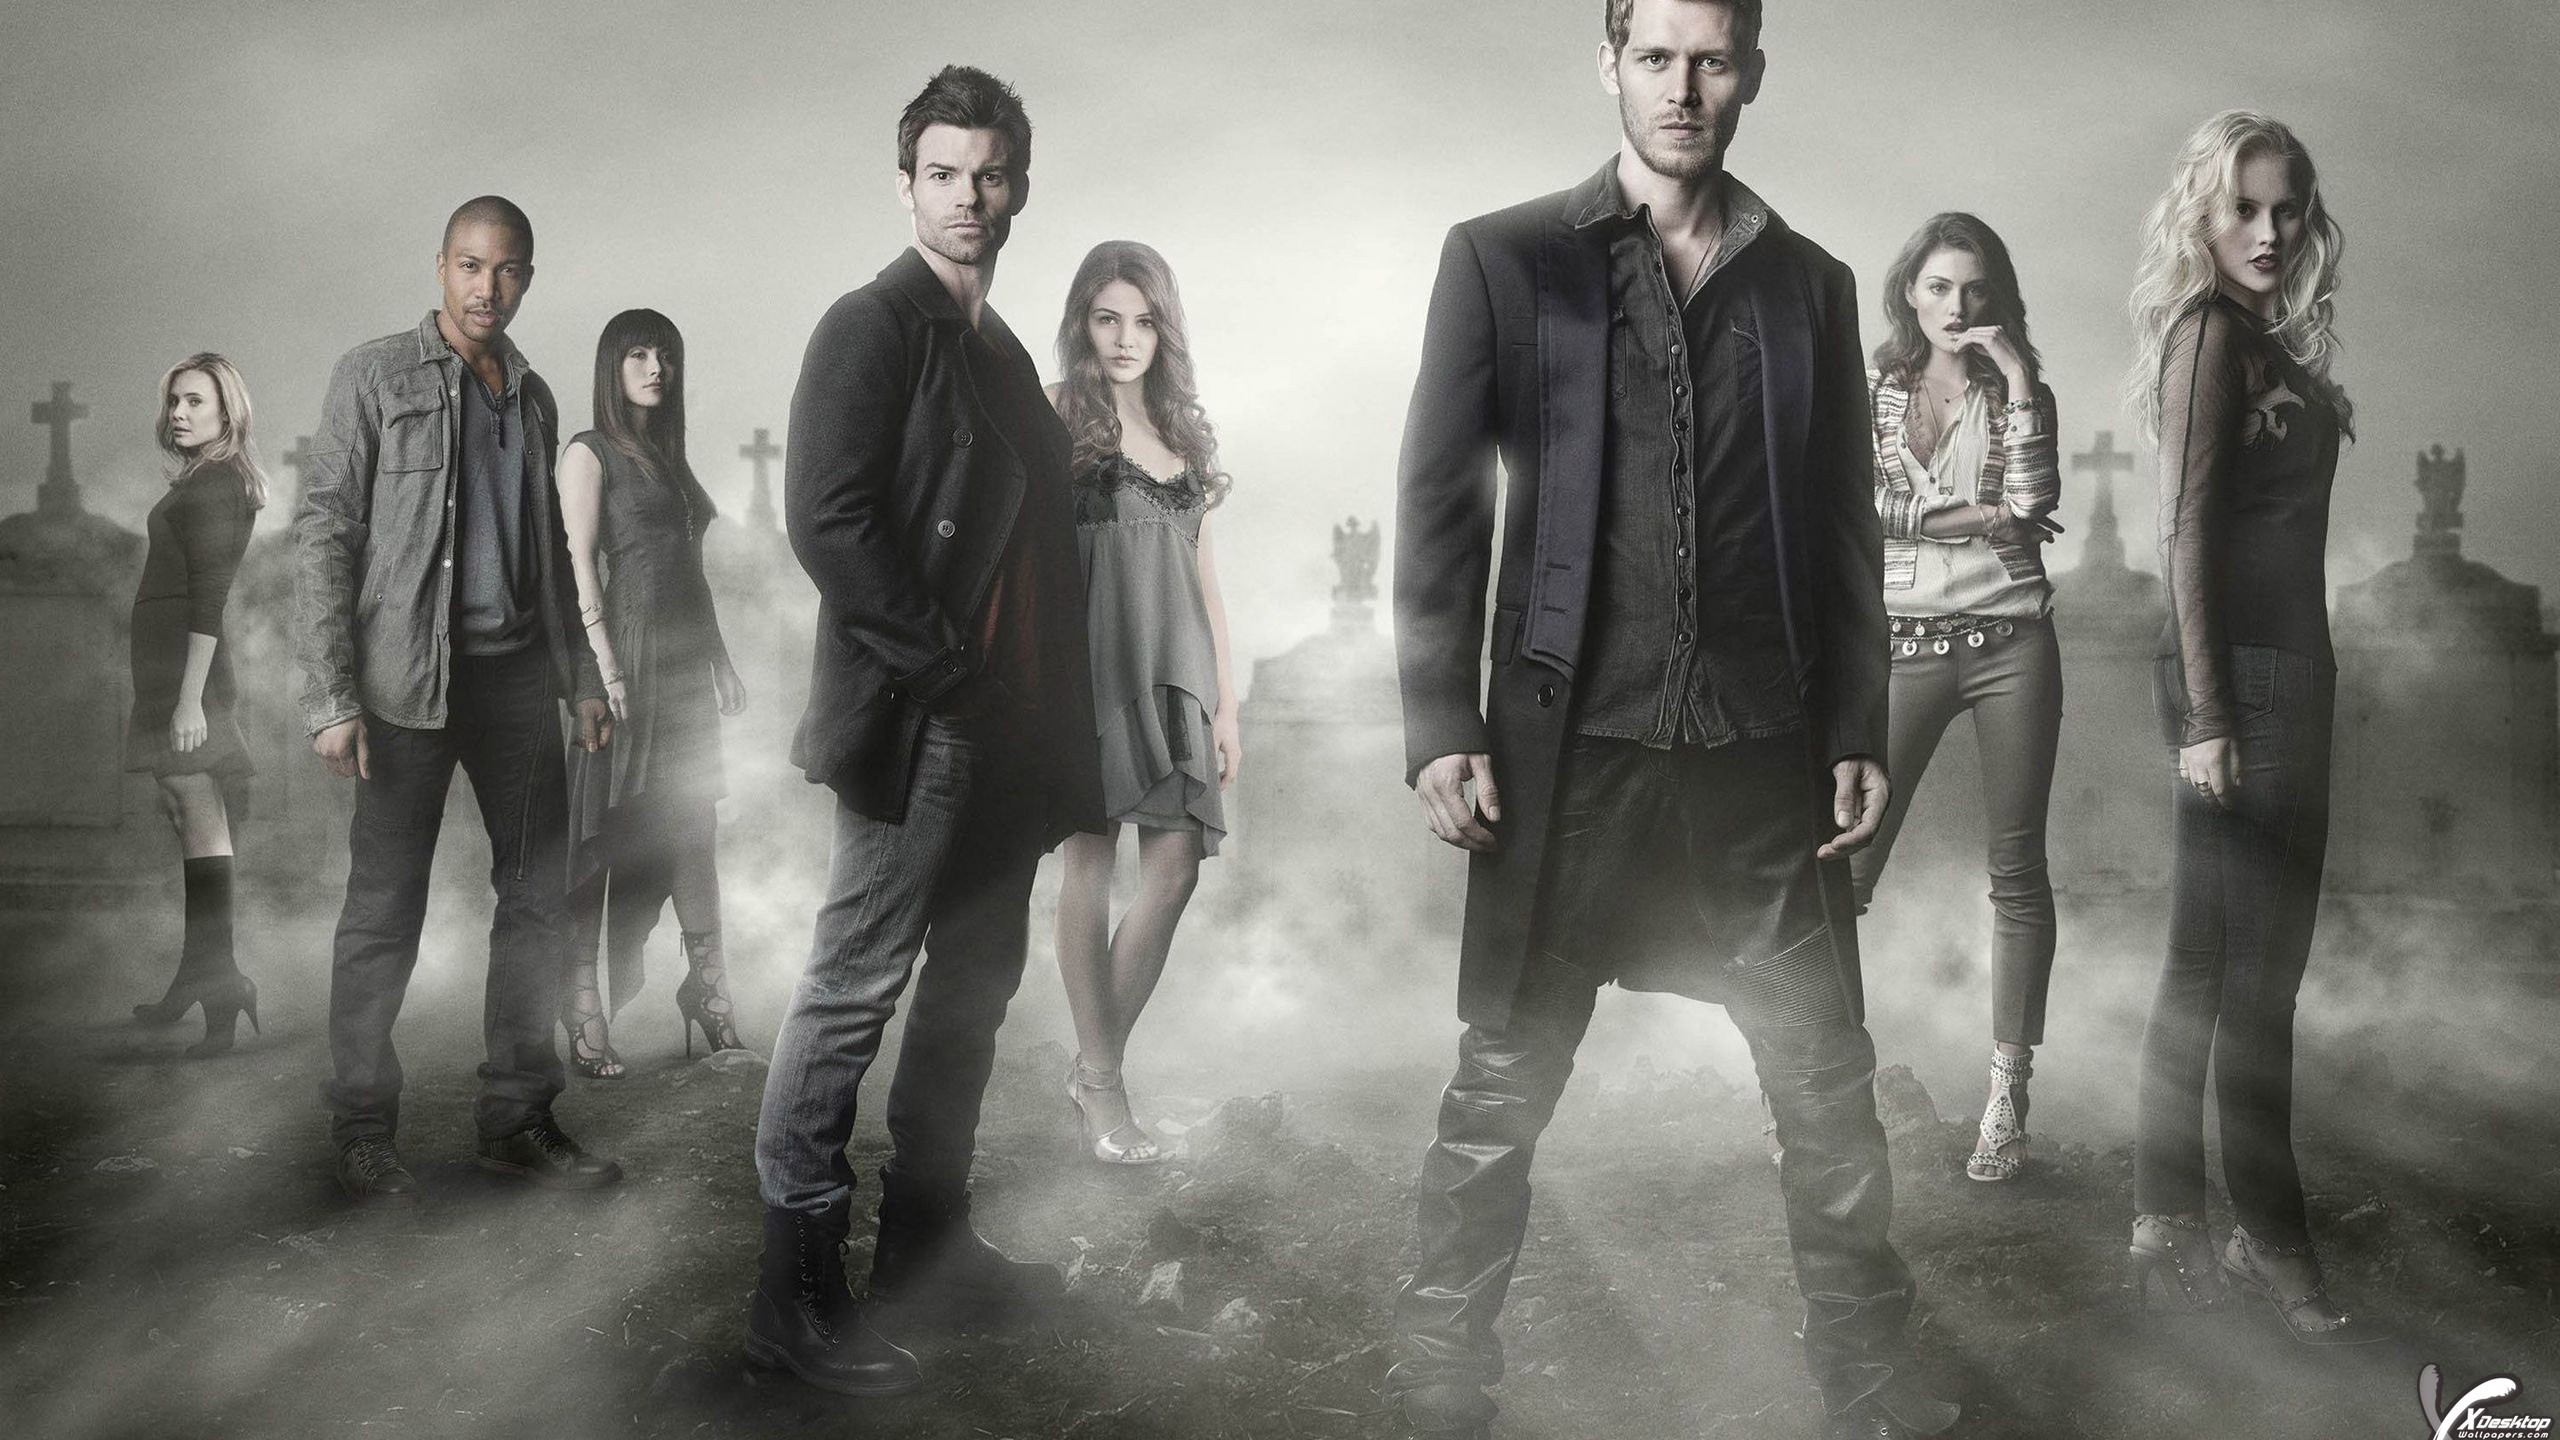 2560x1440 You are viewing wallpaper titled "All Characters Of The Originals ...